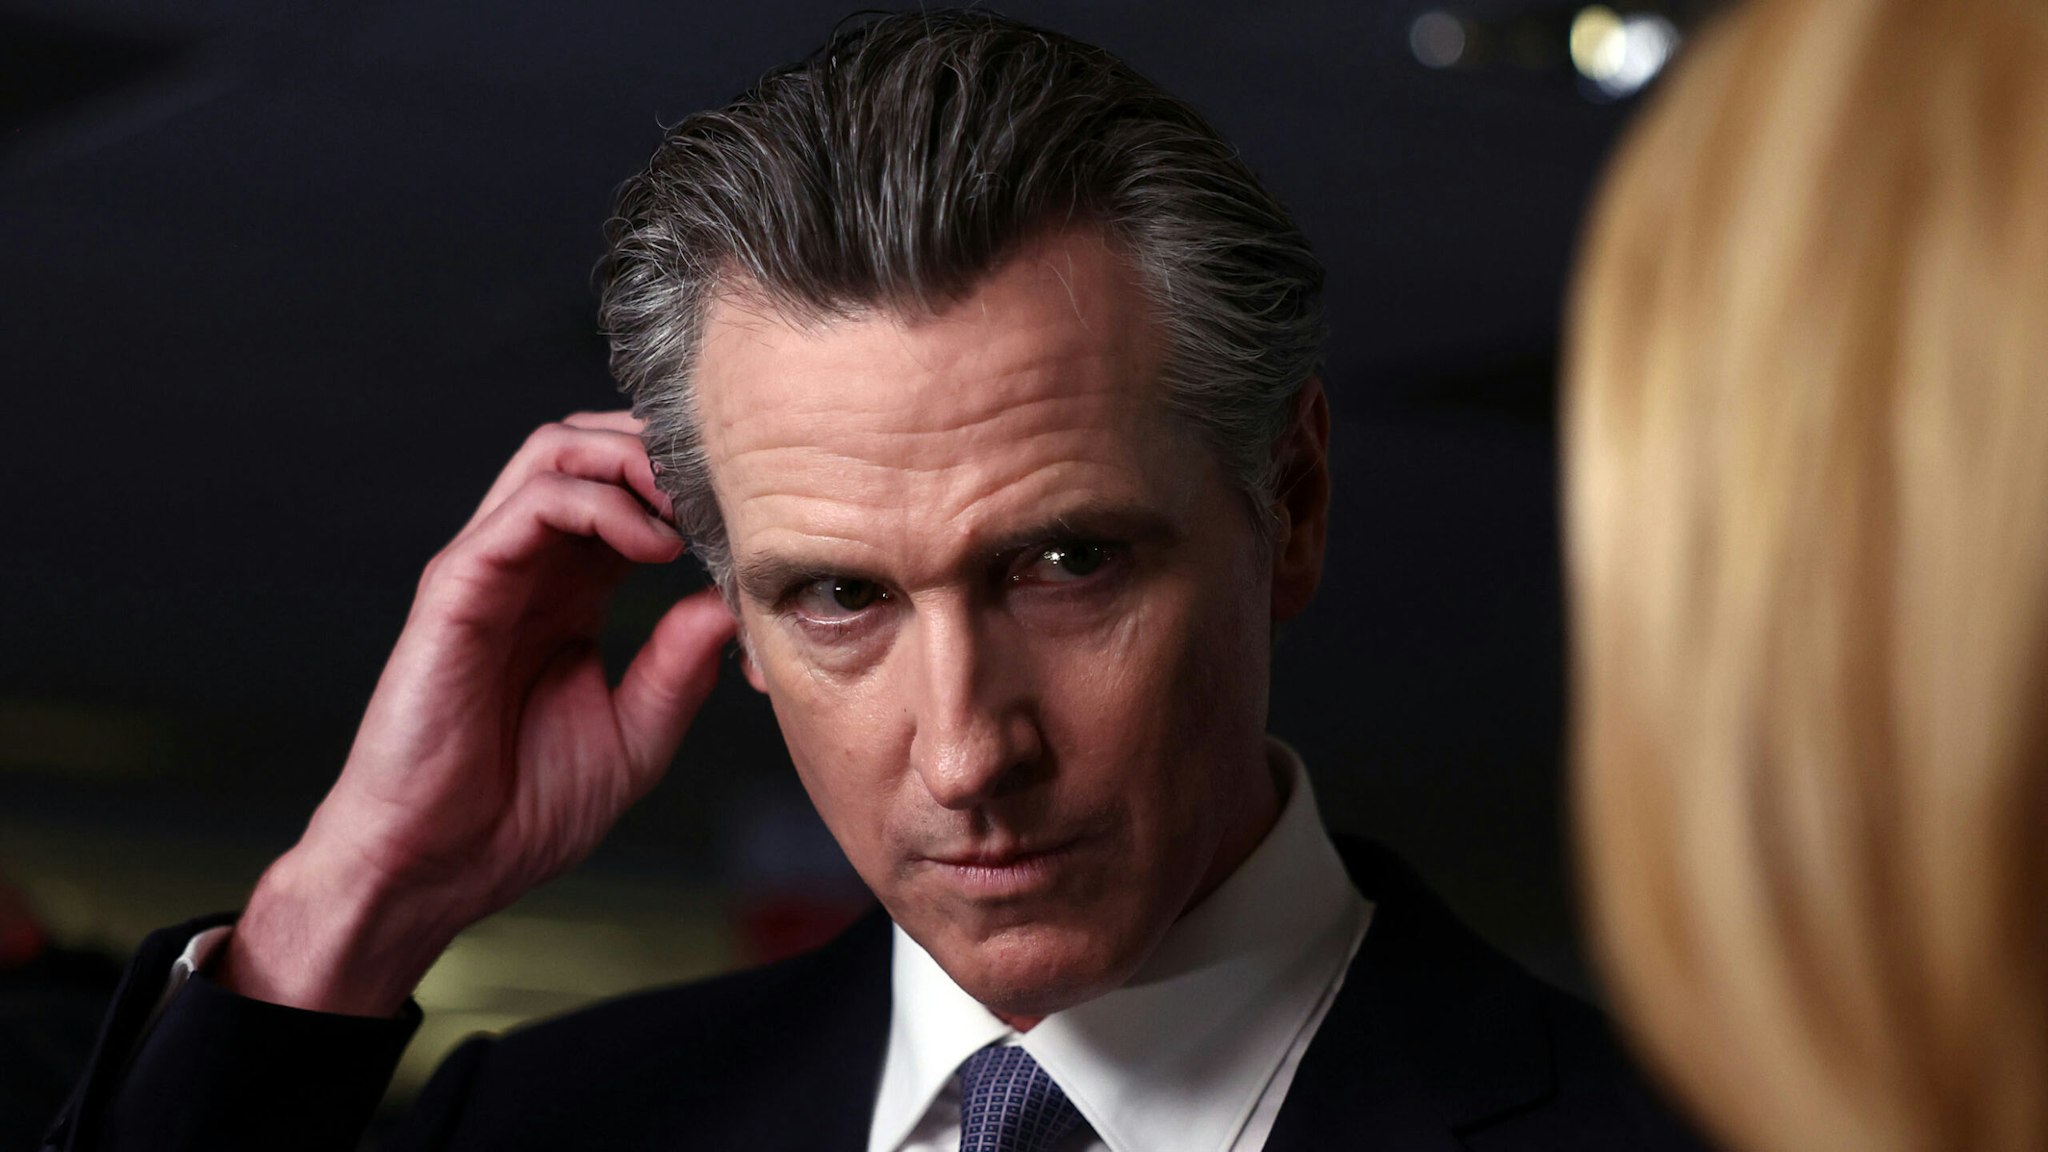 SIMI VALLEY, CALIFORNIA - SEPTEMBER 27: California Gov. Gavin Newsom talks to reporters in the spin room following the FOX Business Republican Primary Debate at the Ronald Reagan Presidential Library on September 27, 2023 in Simi Valley, California. Seven presidential hopefuls squared off in the second Republican primary debate as former U.S. President Donald Trump, currently facing indictments in four locations, declined again to participate.